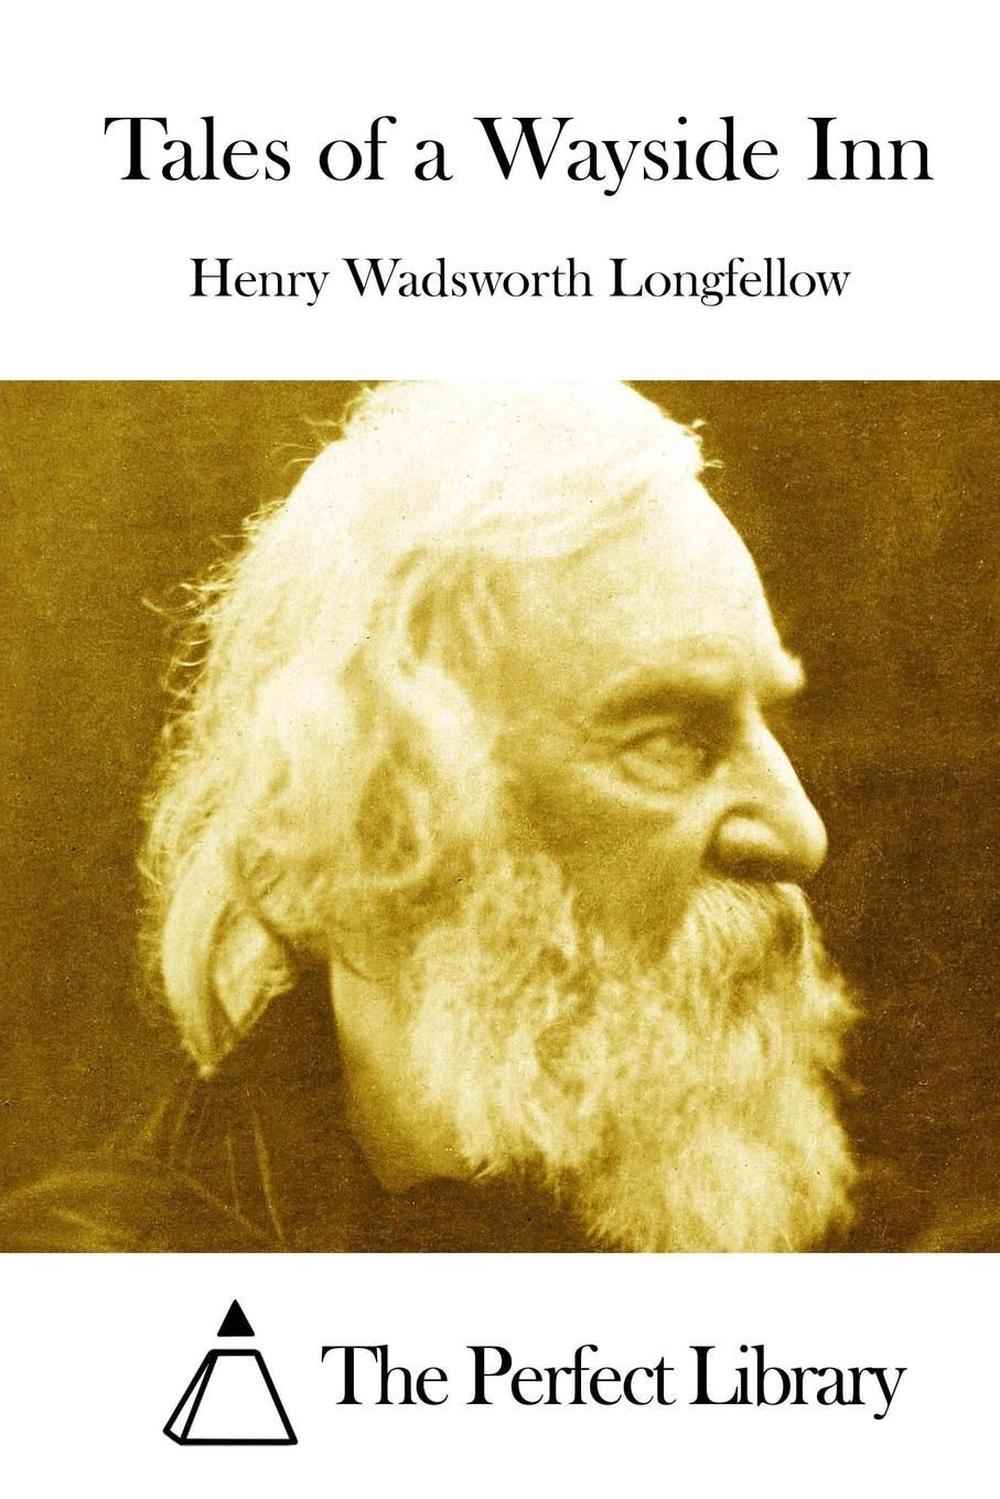 Tales of a Wayside Inn by Henry Wadsworth Longfellow (English ...